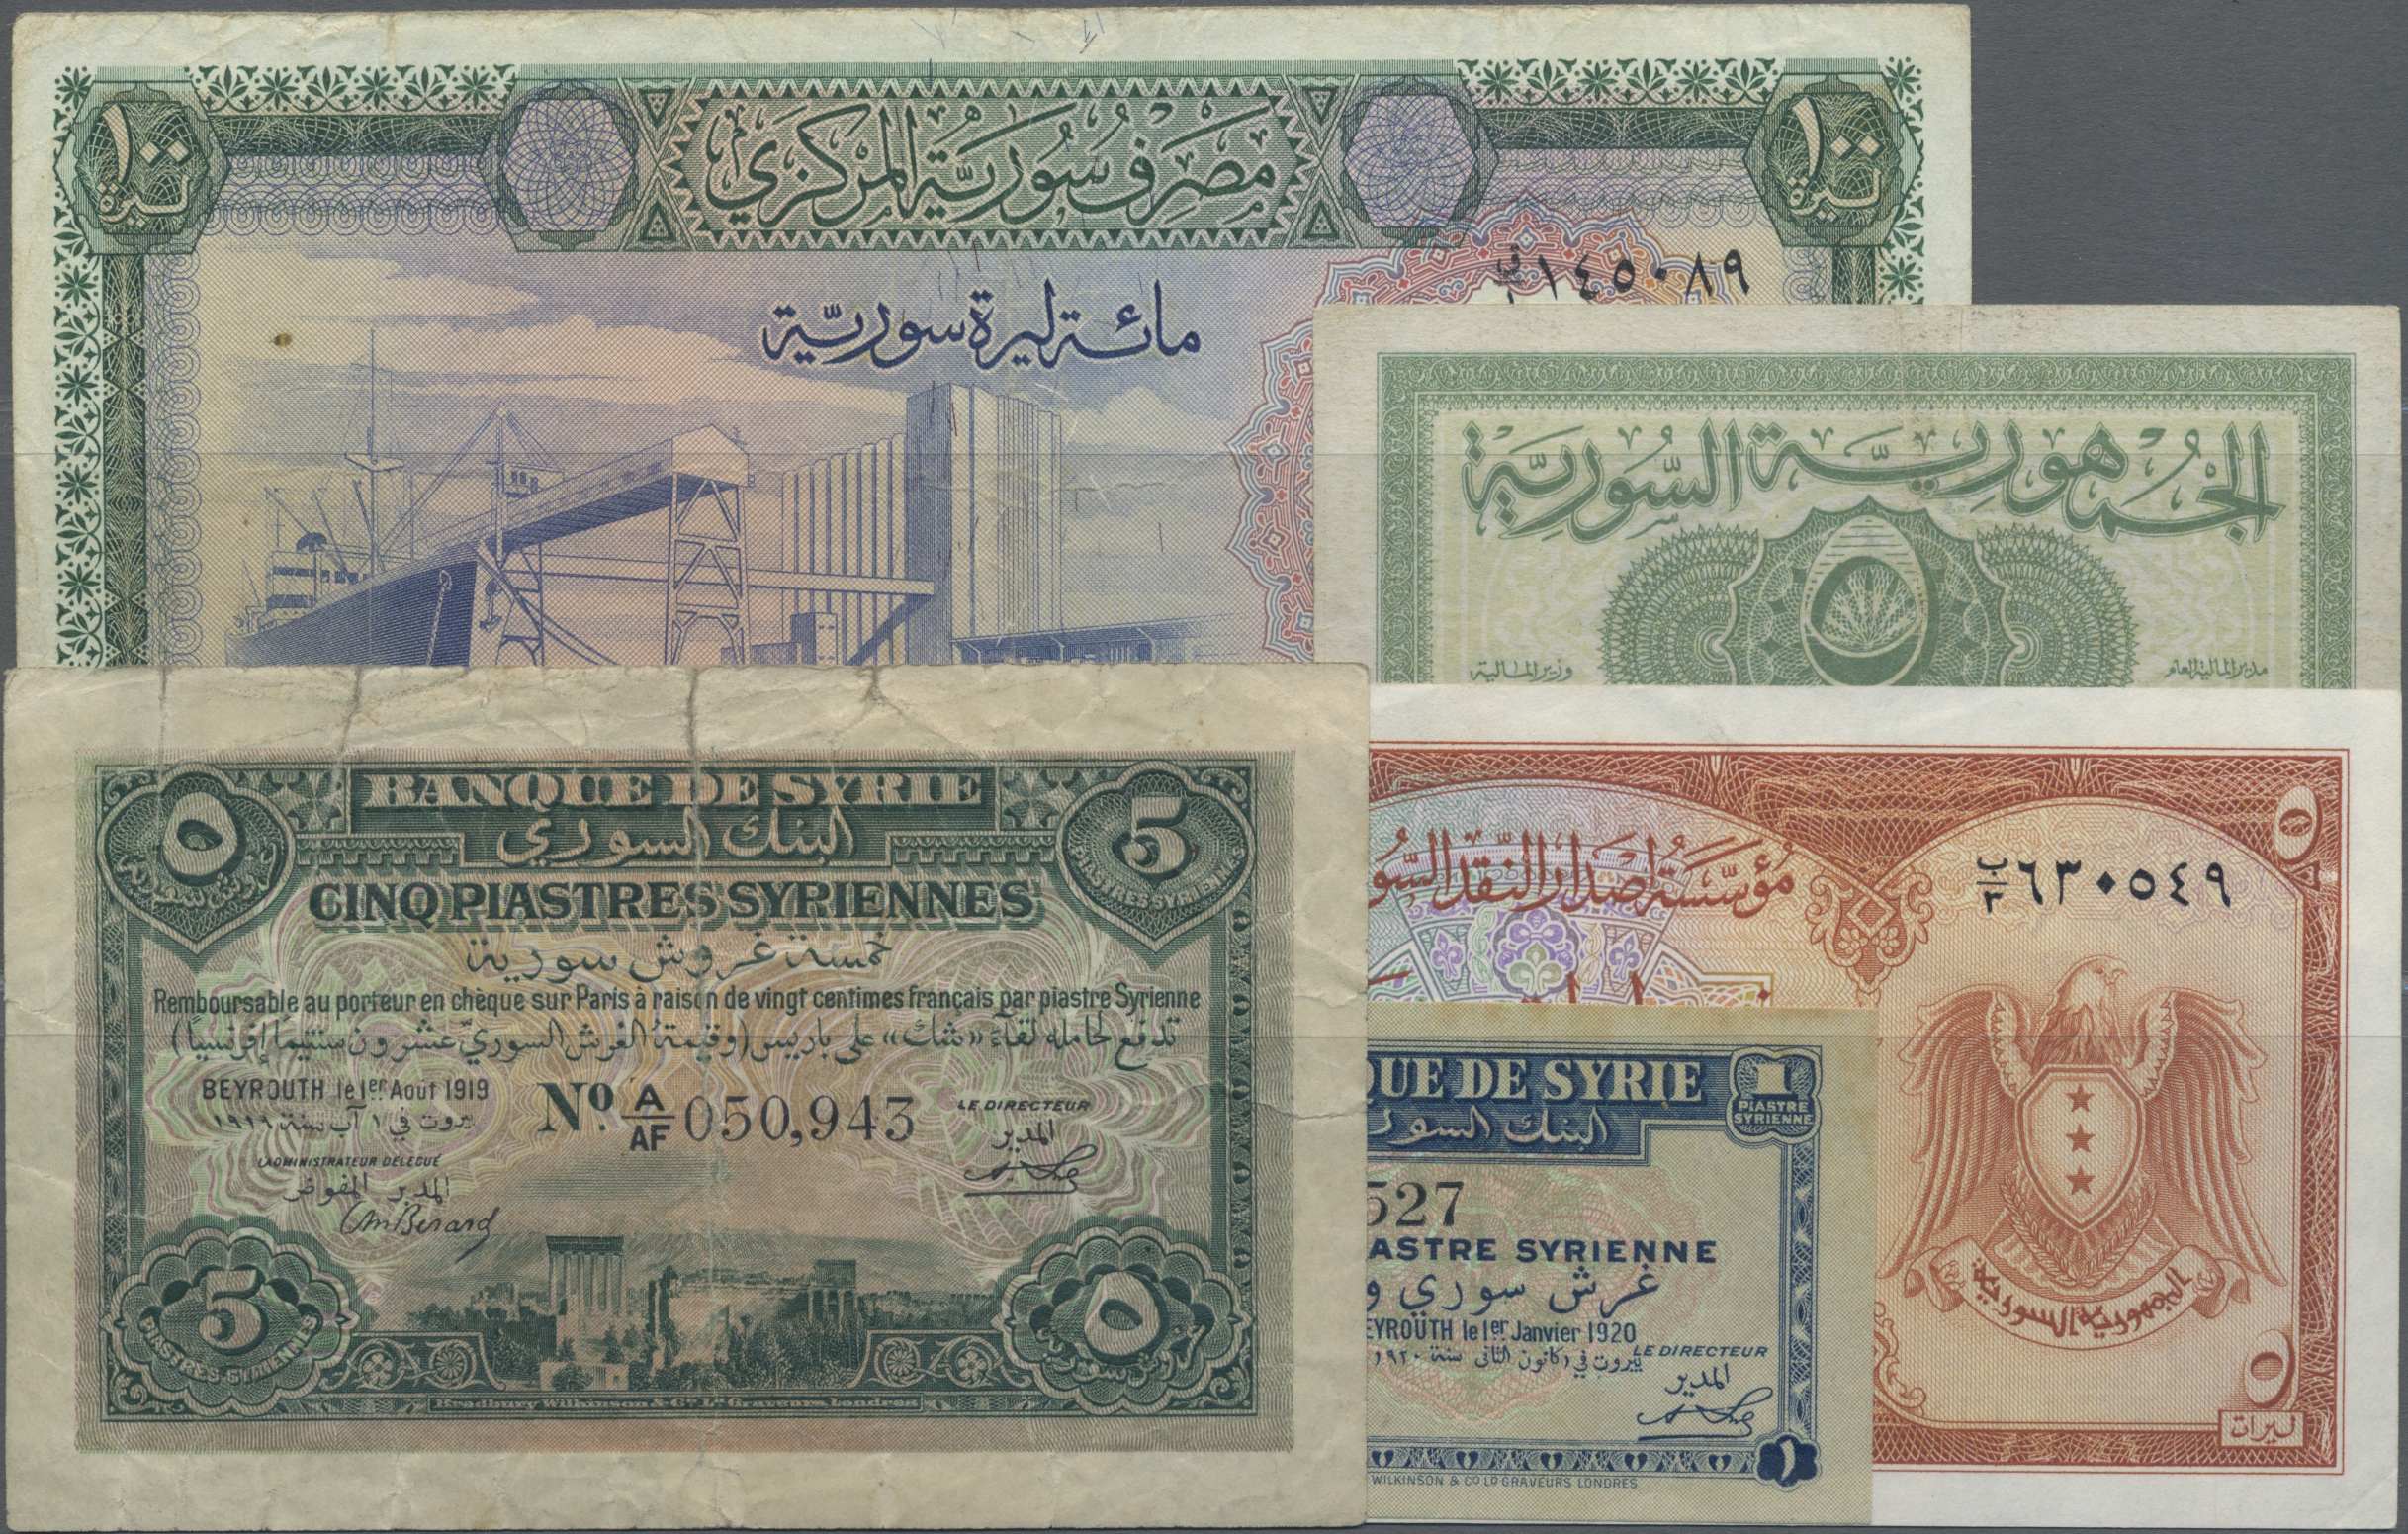 Lot 00482 - Syria / Syrien | Banknoten  -  Auktionshaus Christoph Gärtner GmbH & Co. KG 55th AUCTION - Day 1